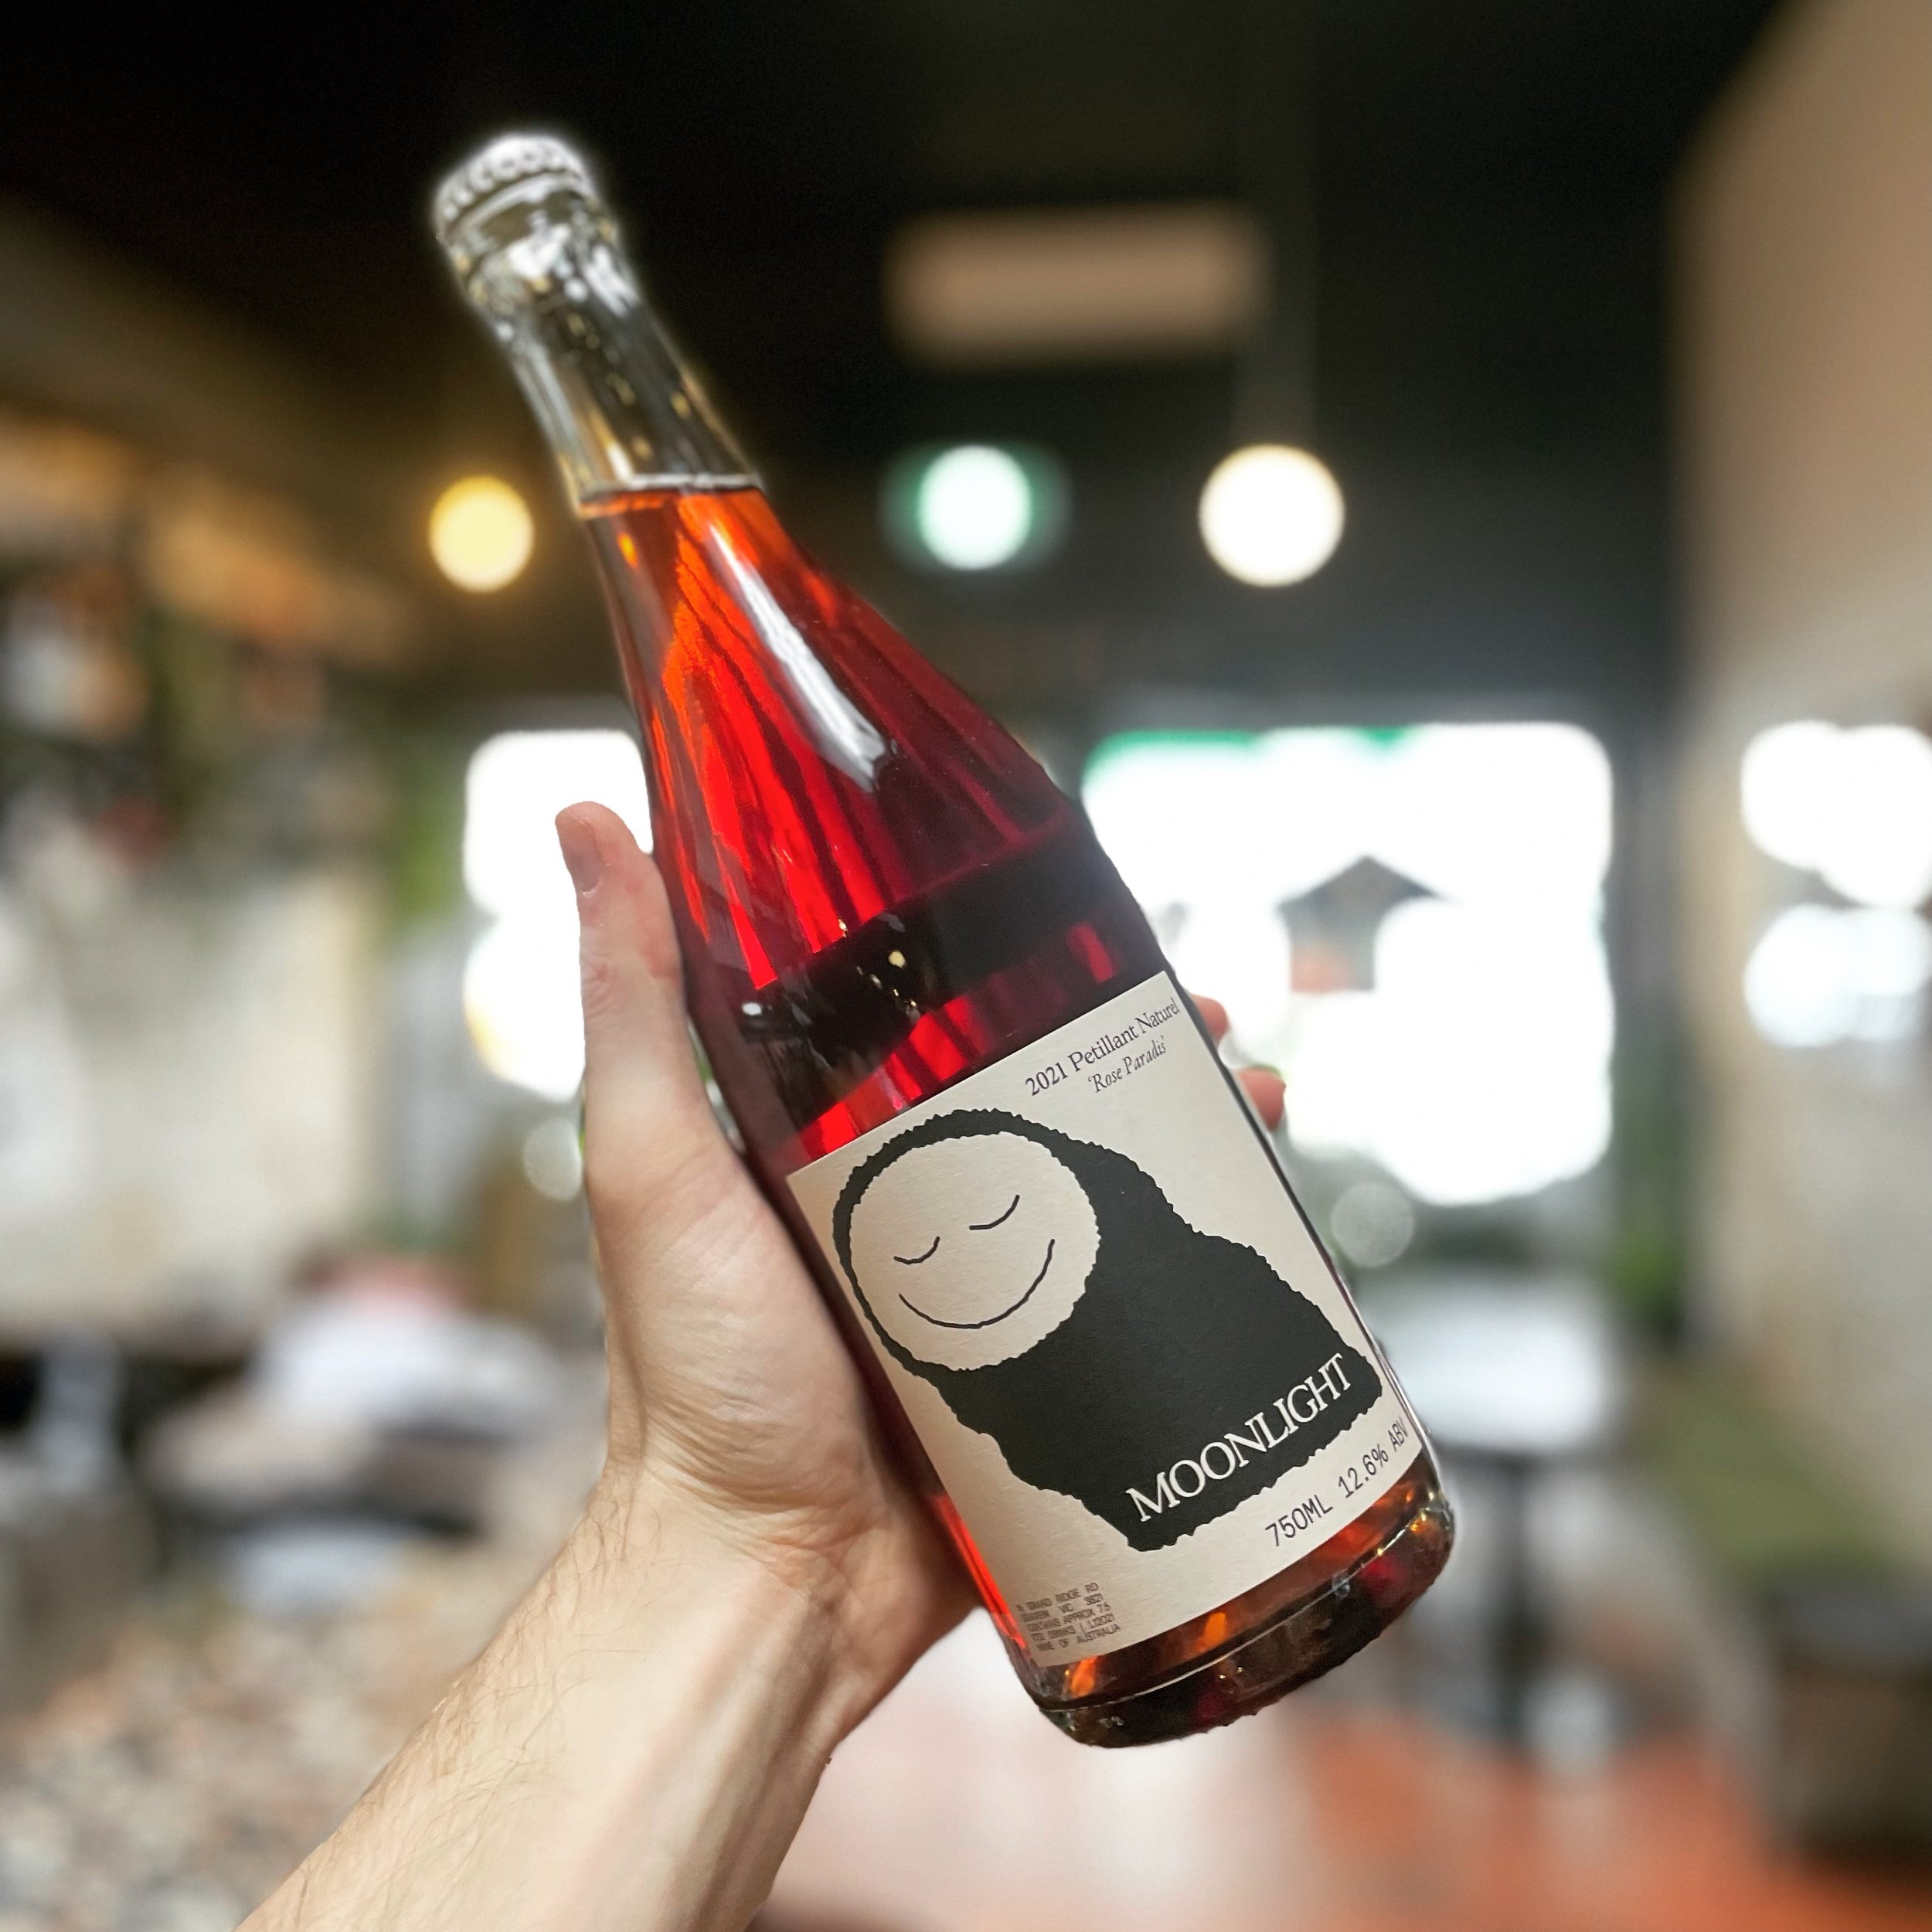 Lots of new bottles have hit the shelves here &mdash; including this 100% Syrah Pet Nat from @moonlight__wine 

A lighter acid-driven sparkling with notes of rose petal and your favourite red confectionery. Some spice in there to make it a fun winter